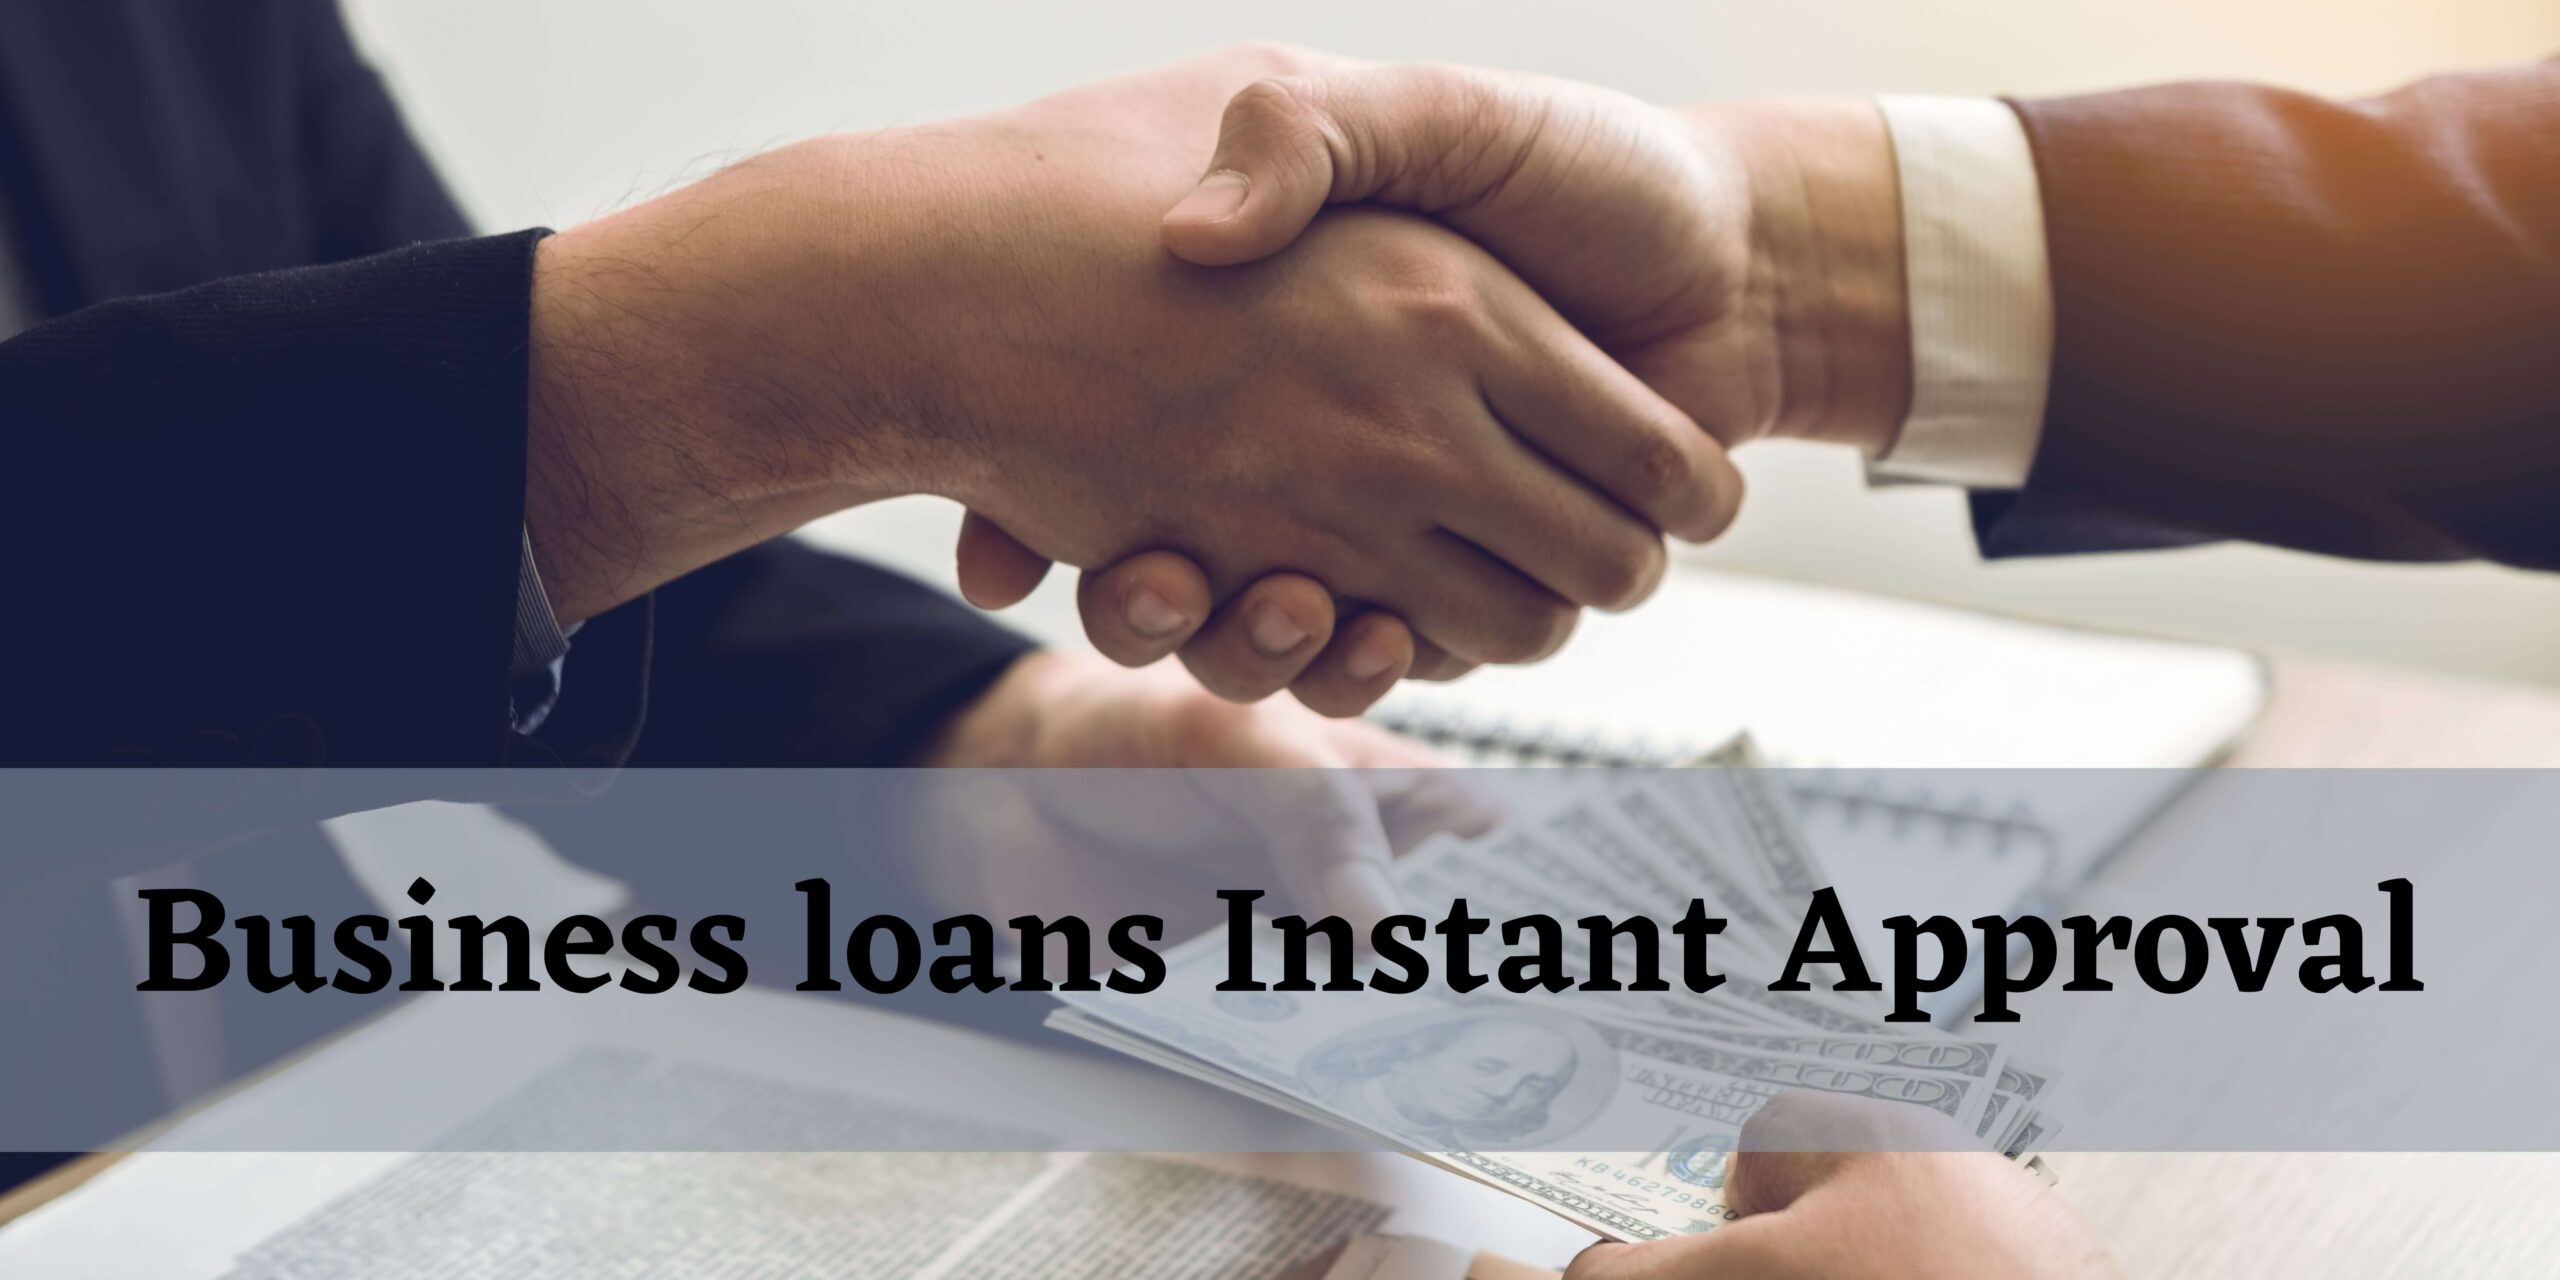 Business Loans with Instant Approval with Cruze Financial